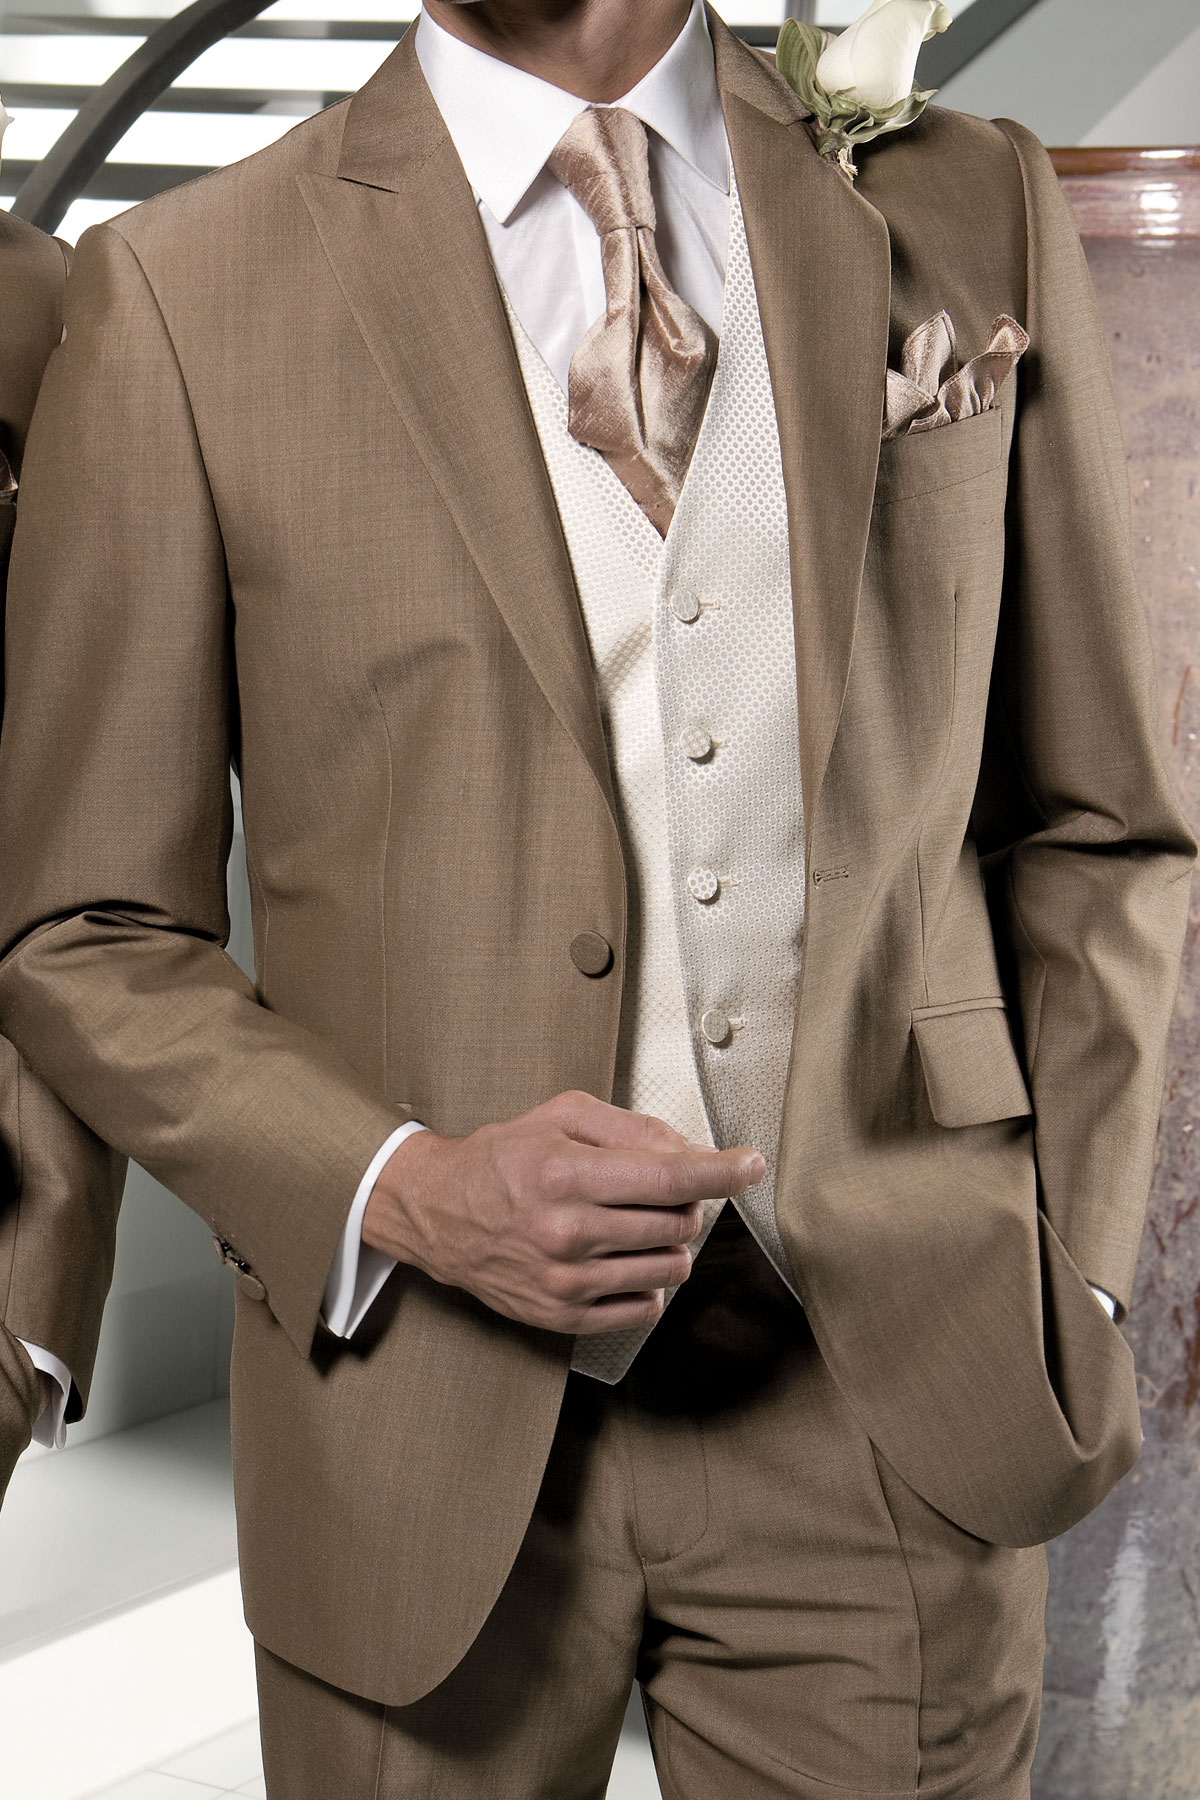 http://www.suitsmen.co.uk/suit-images/full-size/mohair-sandford-boys-suit-jacket-from-torre-1.jpg